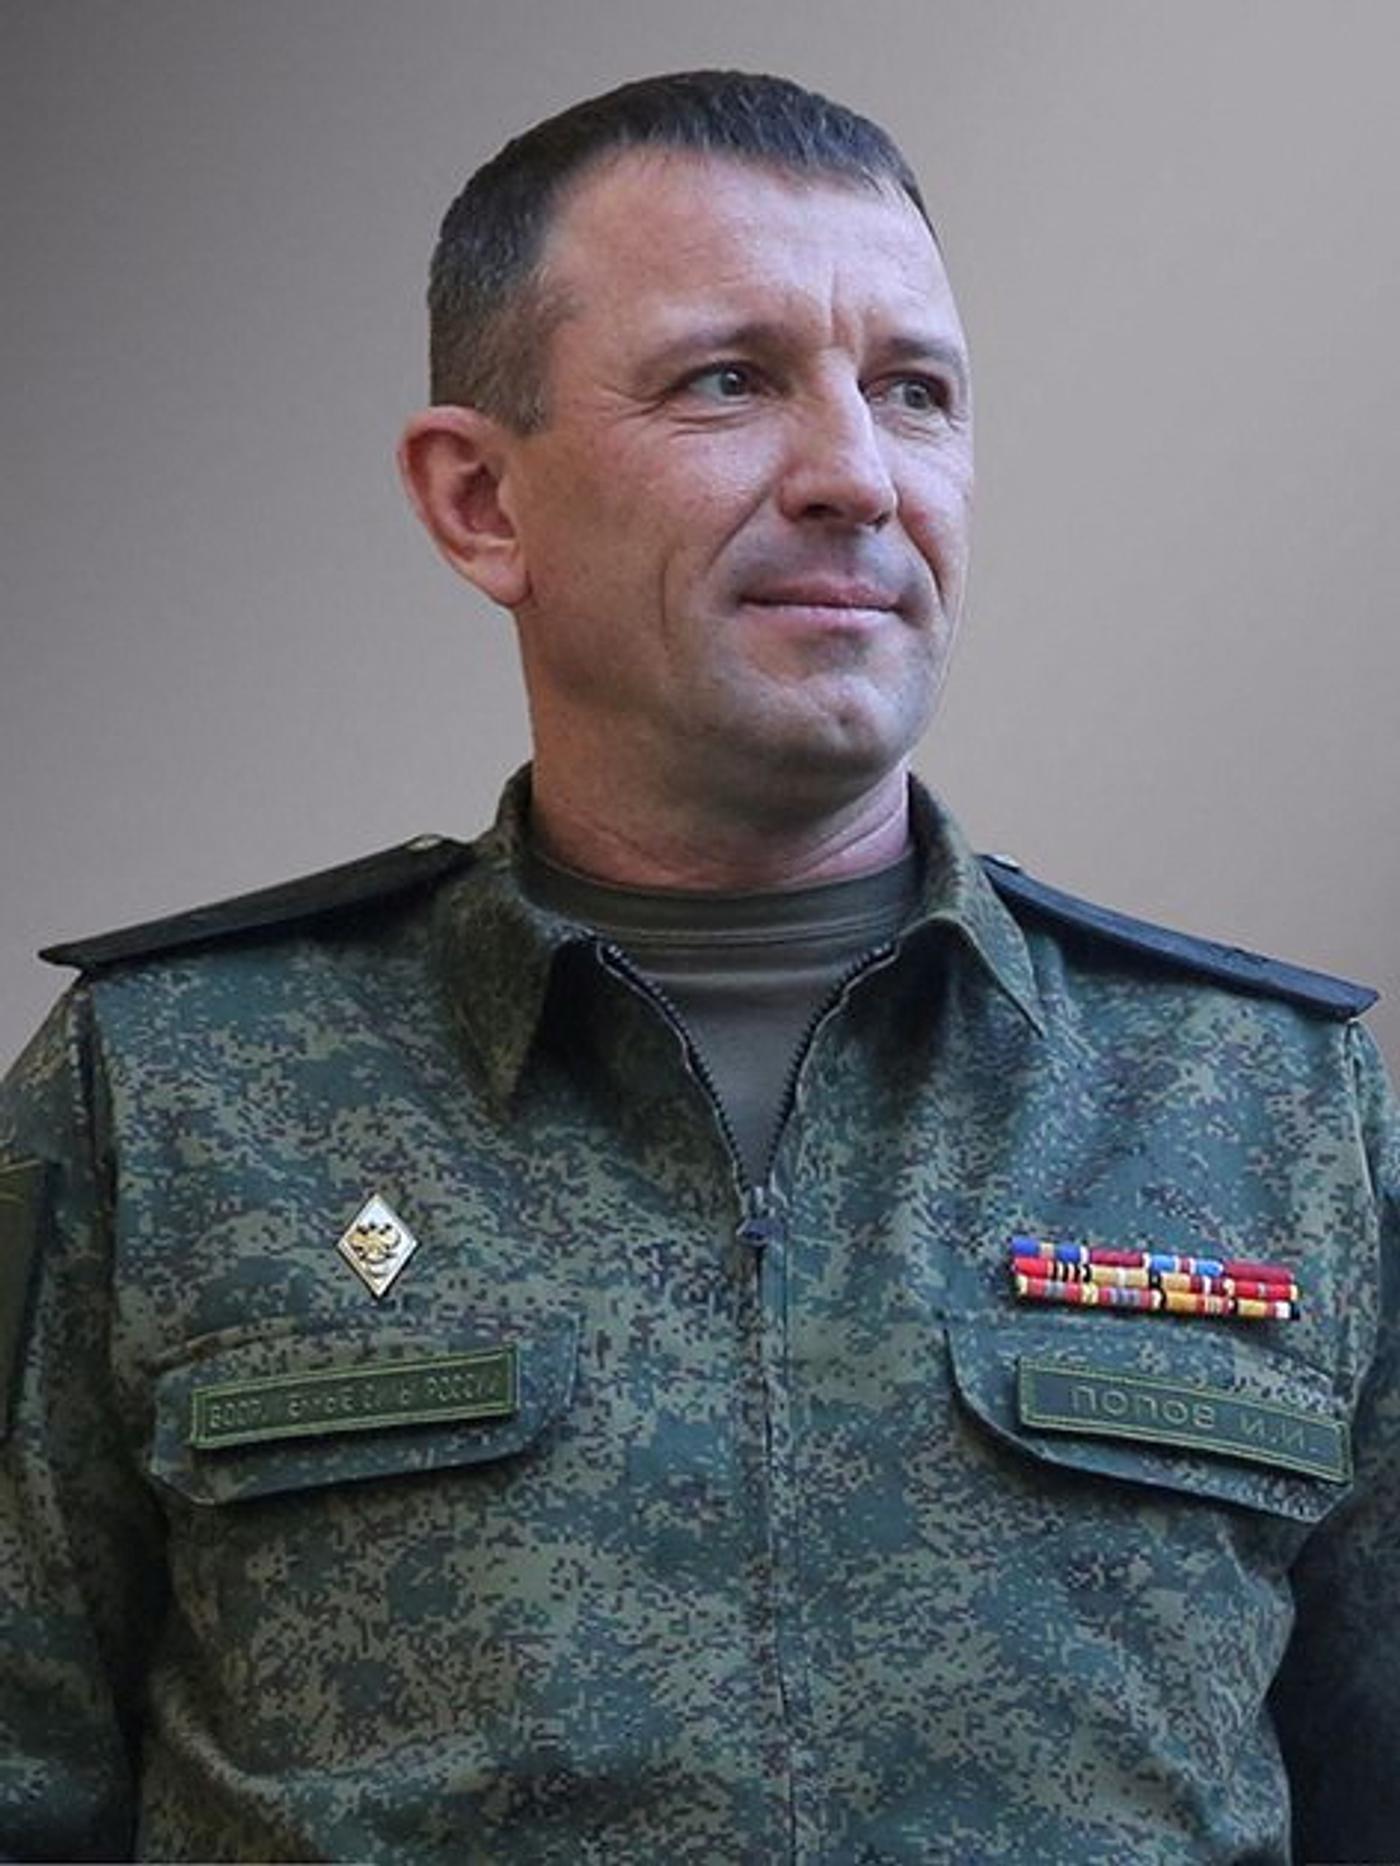 Major General Ivan Popov, who commanded Russia's 58th Combined Arms Army, is seen in this image released on June 9, 2023. Russian Defence Ministry/Handout via REUTERS